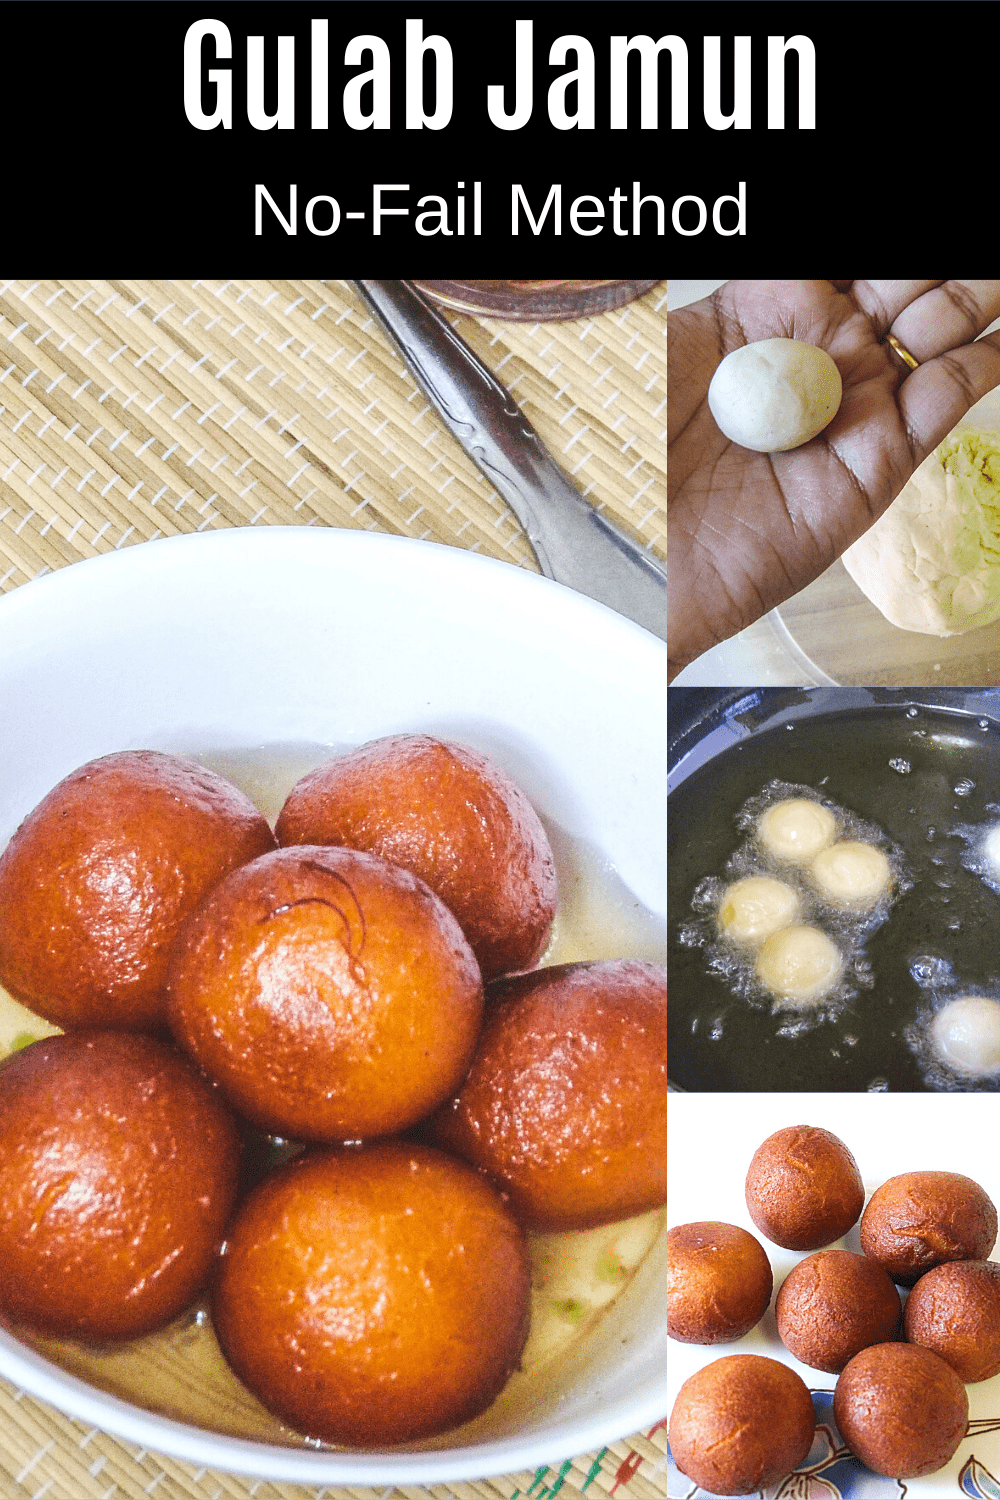 Gulab jamun pin with text on top of the image.